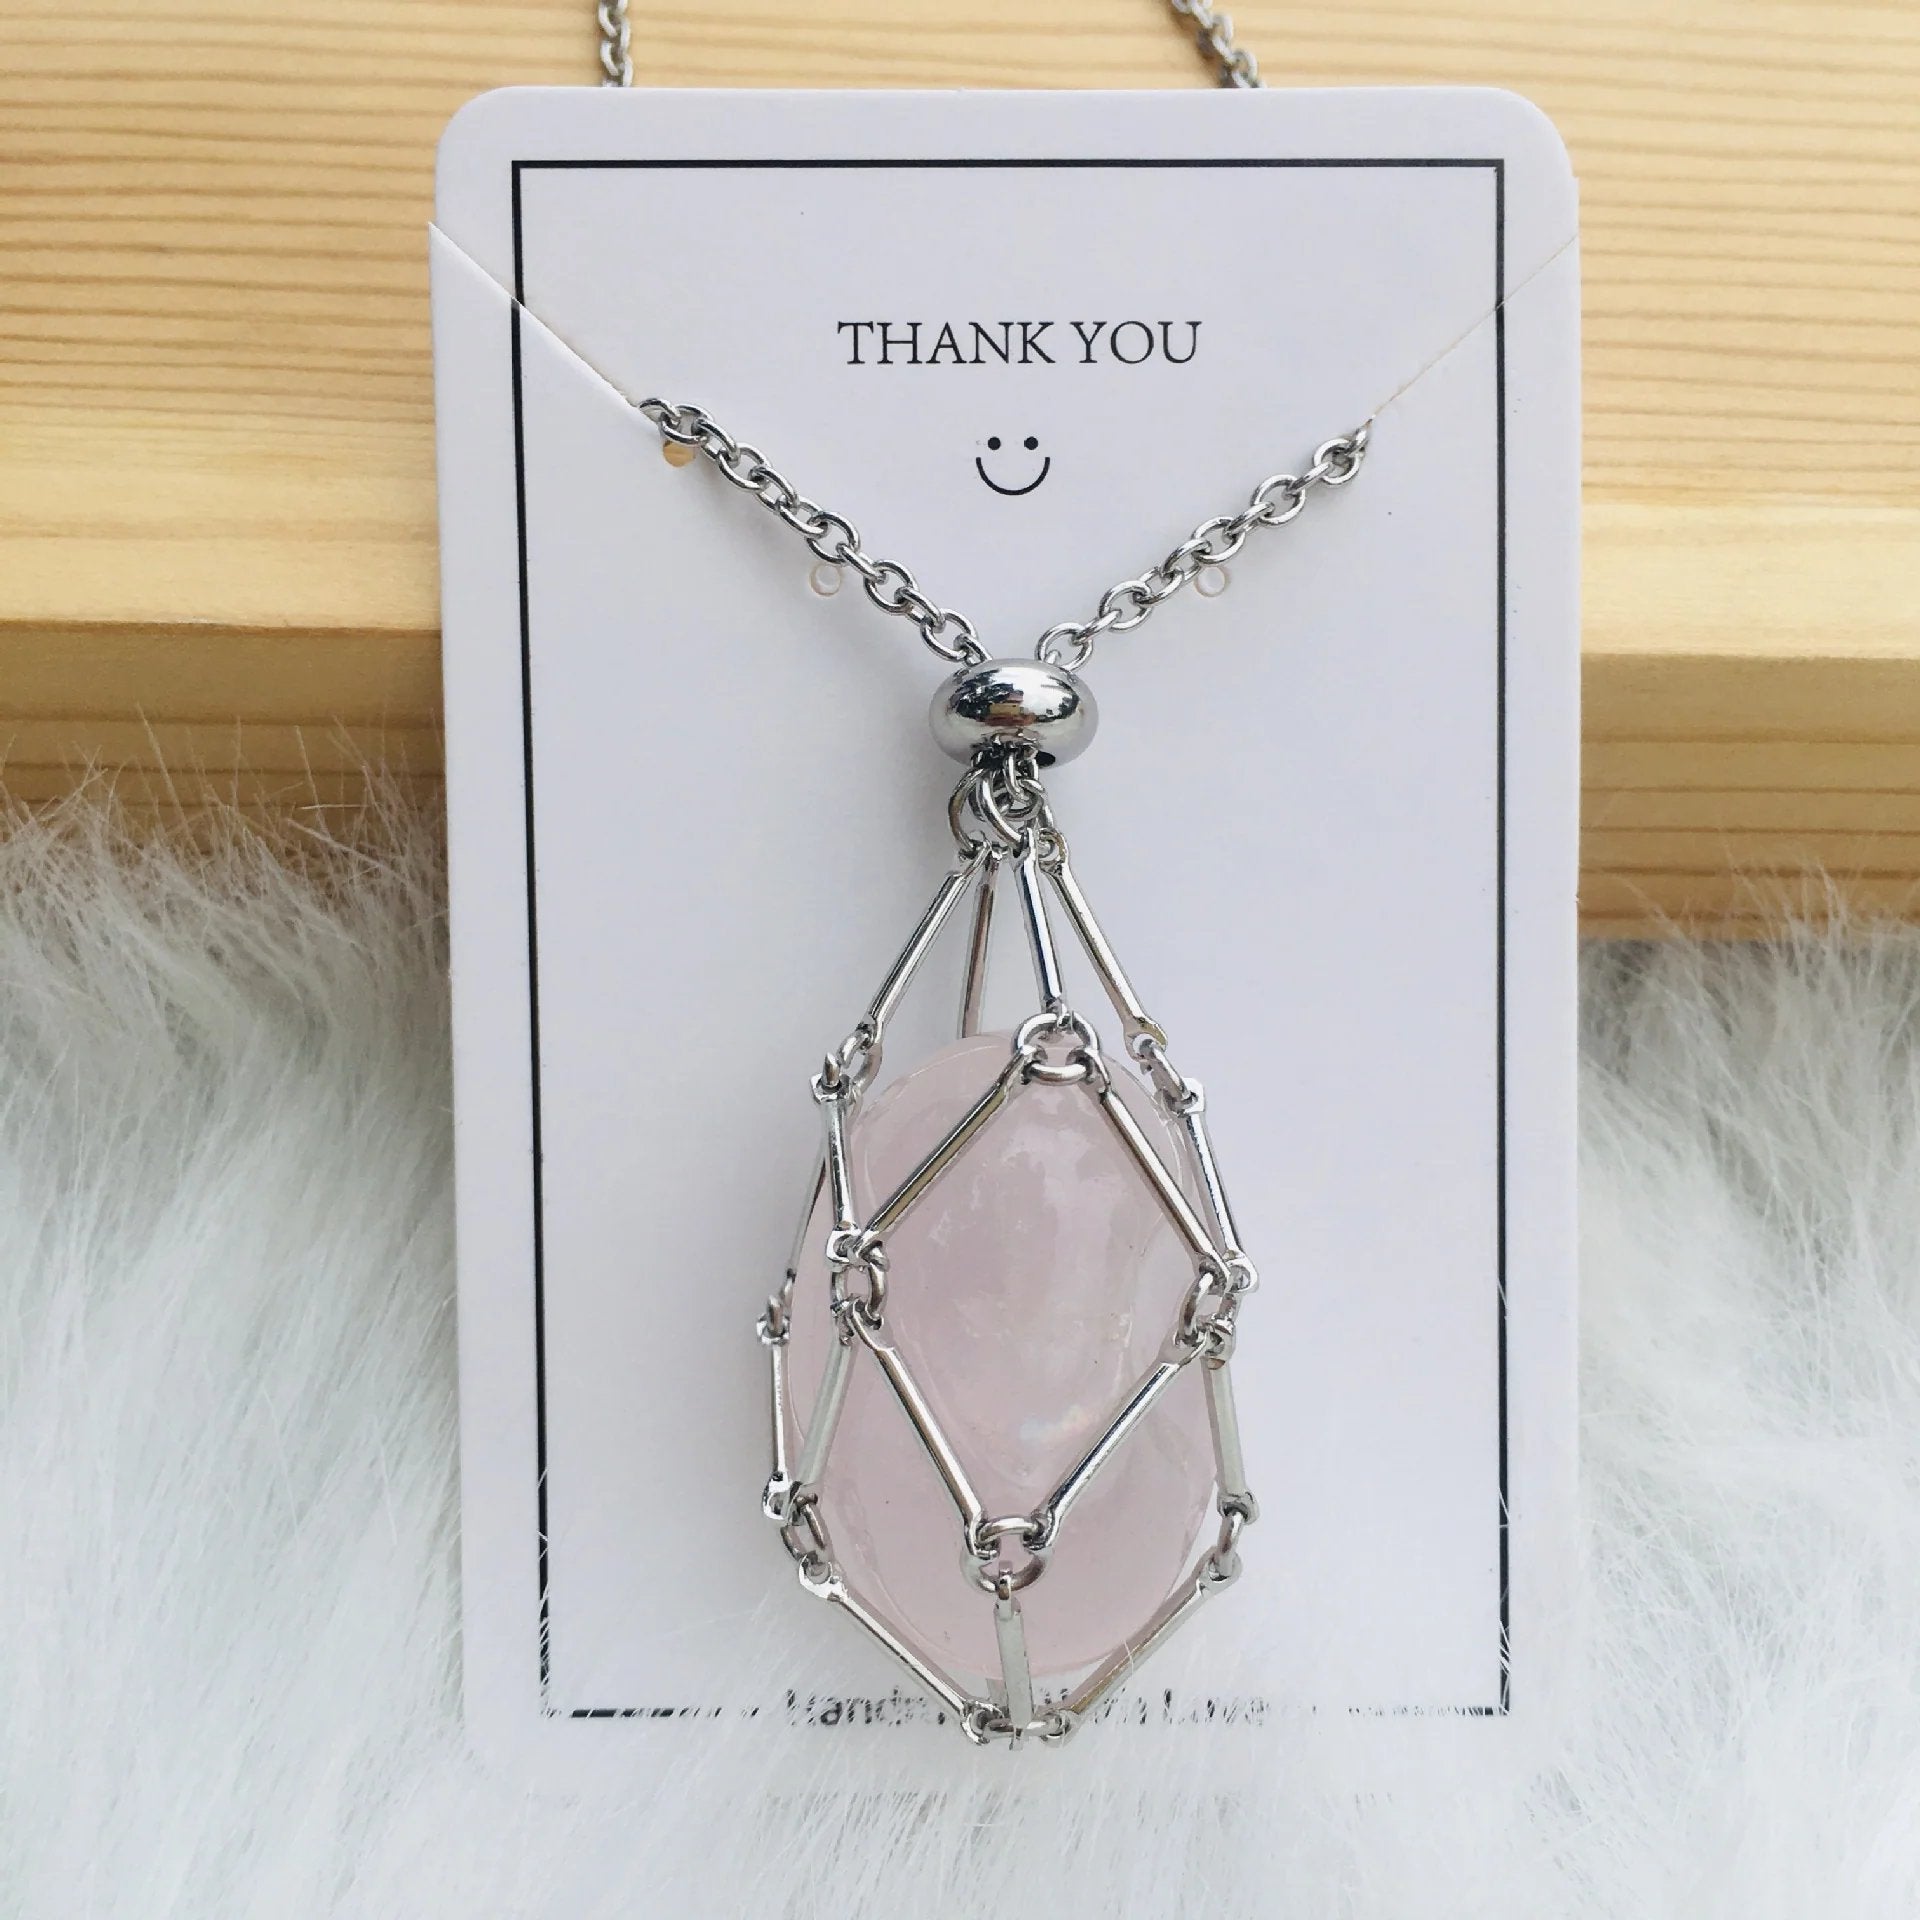 2023 Fashionablet®Crystal Necklace - Free (Crystal) Gift Included🎁